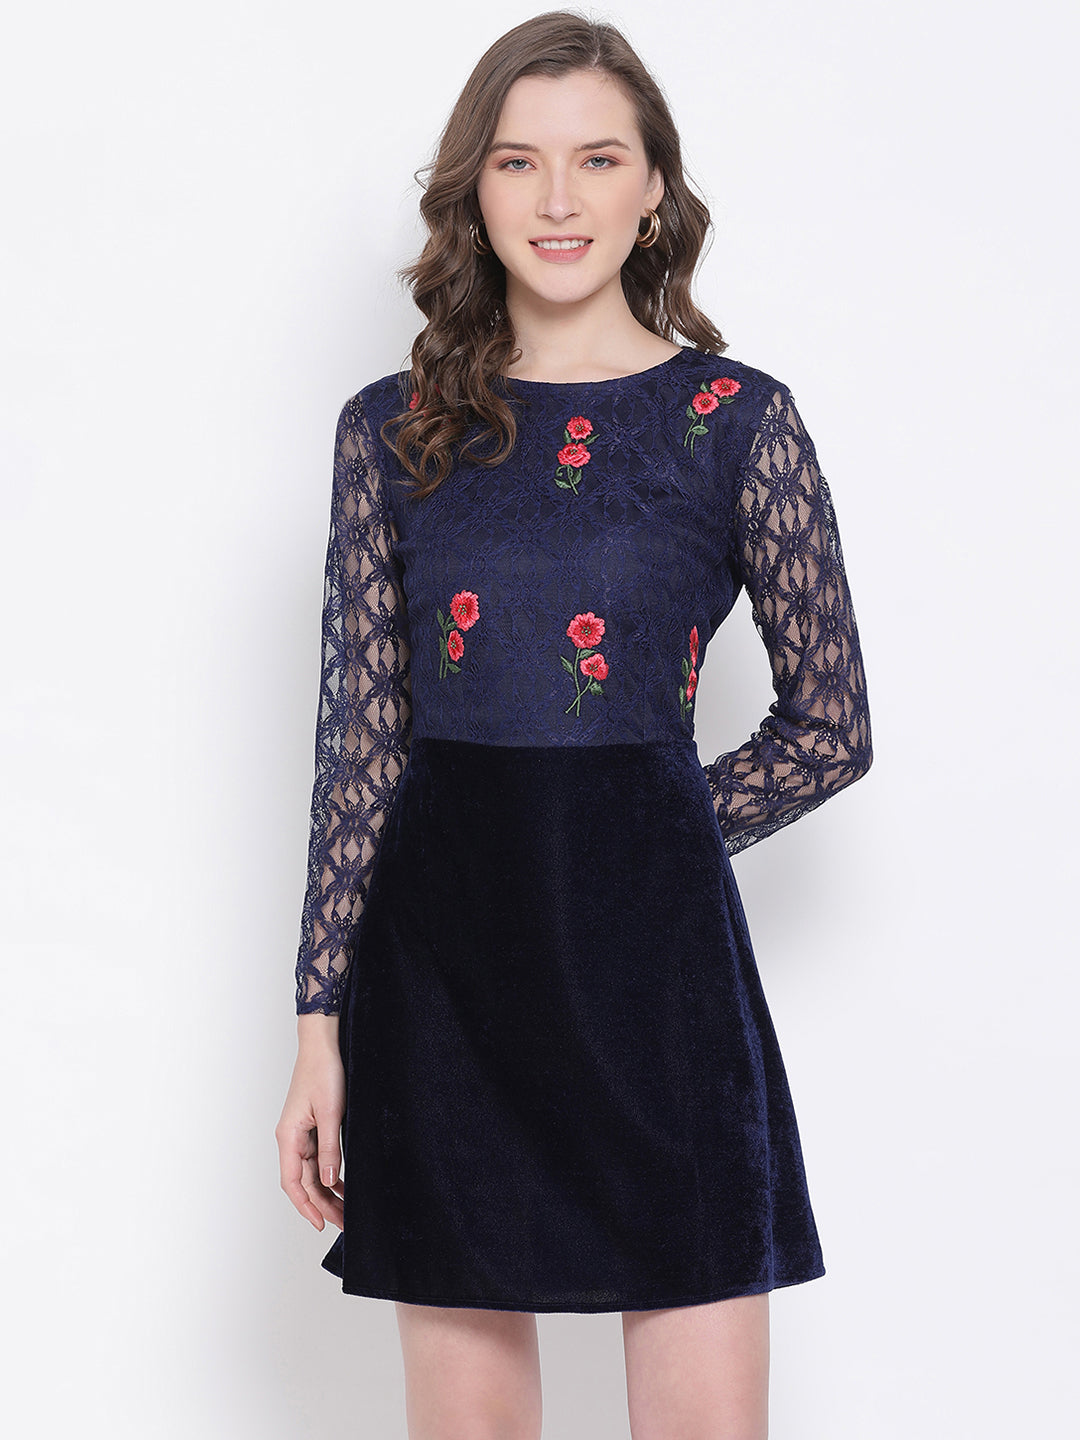 LY2 Polyester Blue Round Neck Long Sleeves A-Line Party Dress For Women